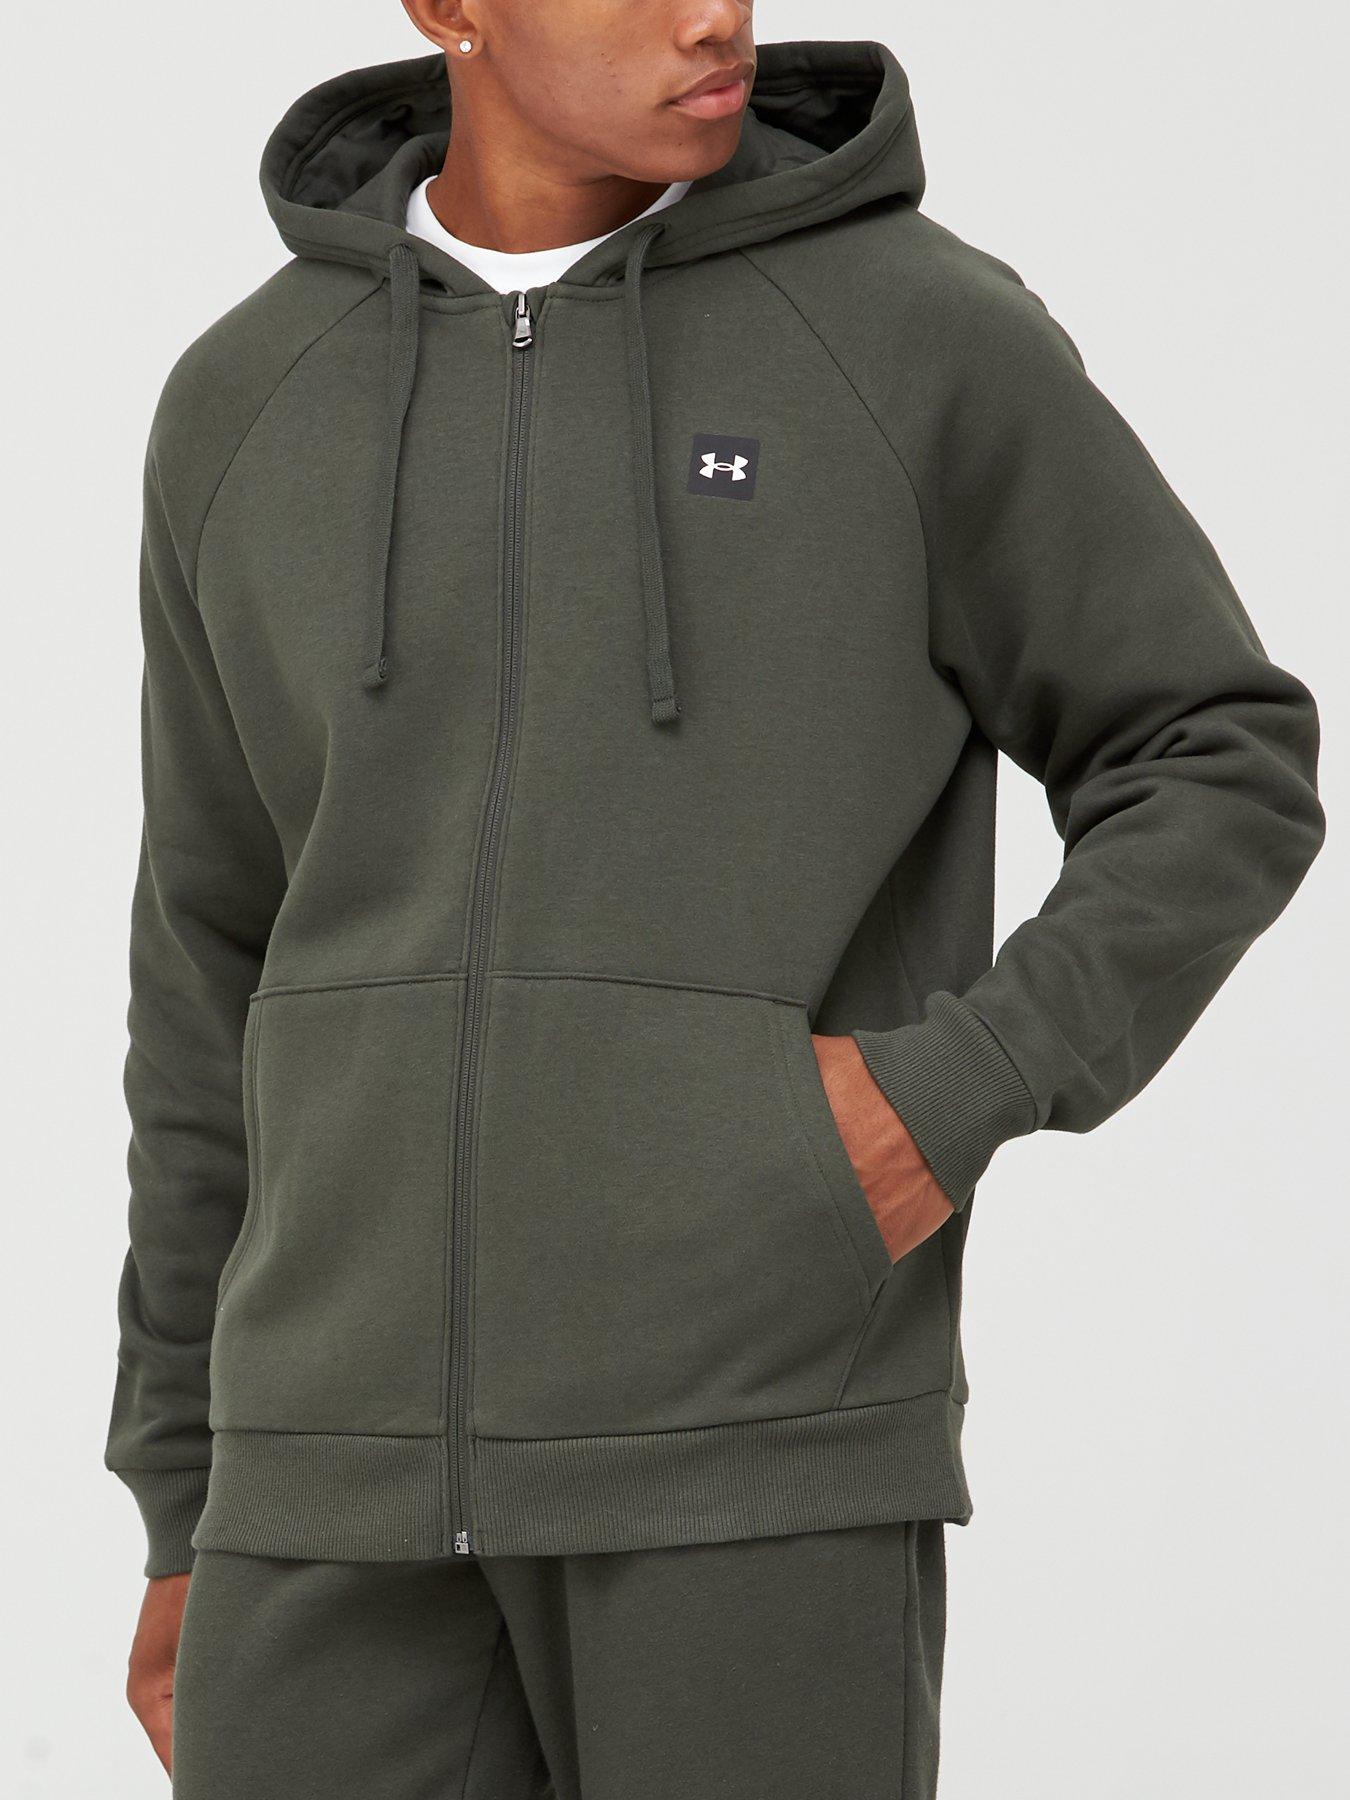 under armour white hoodie mens